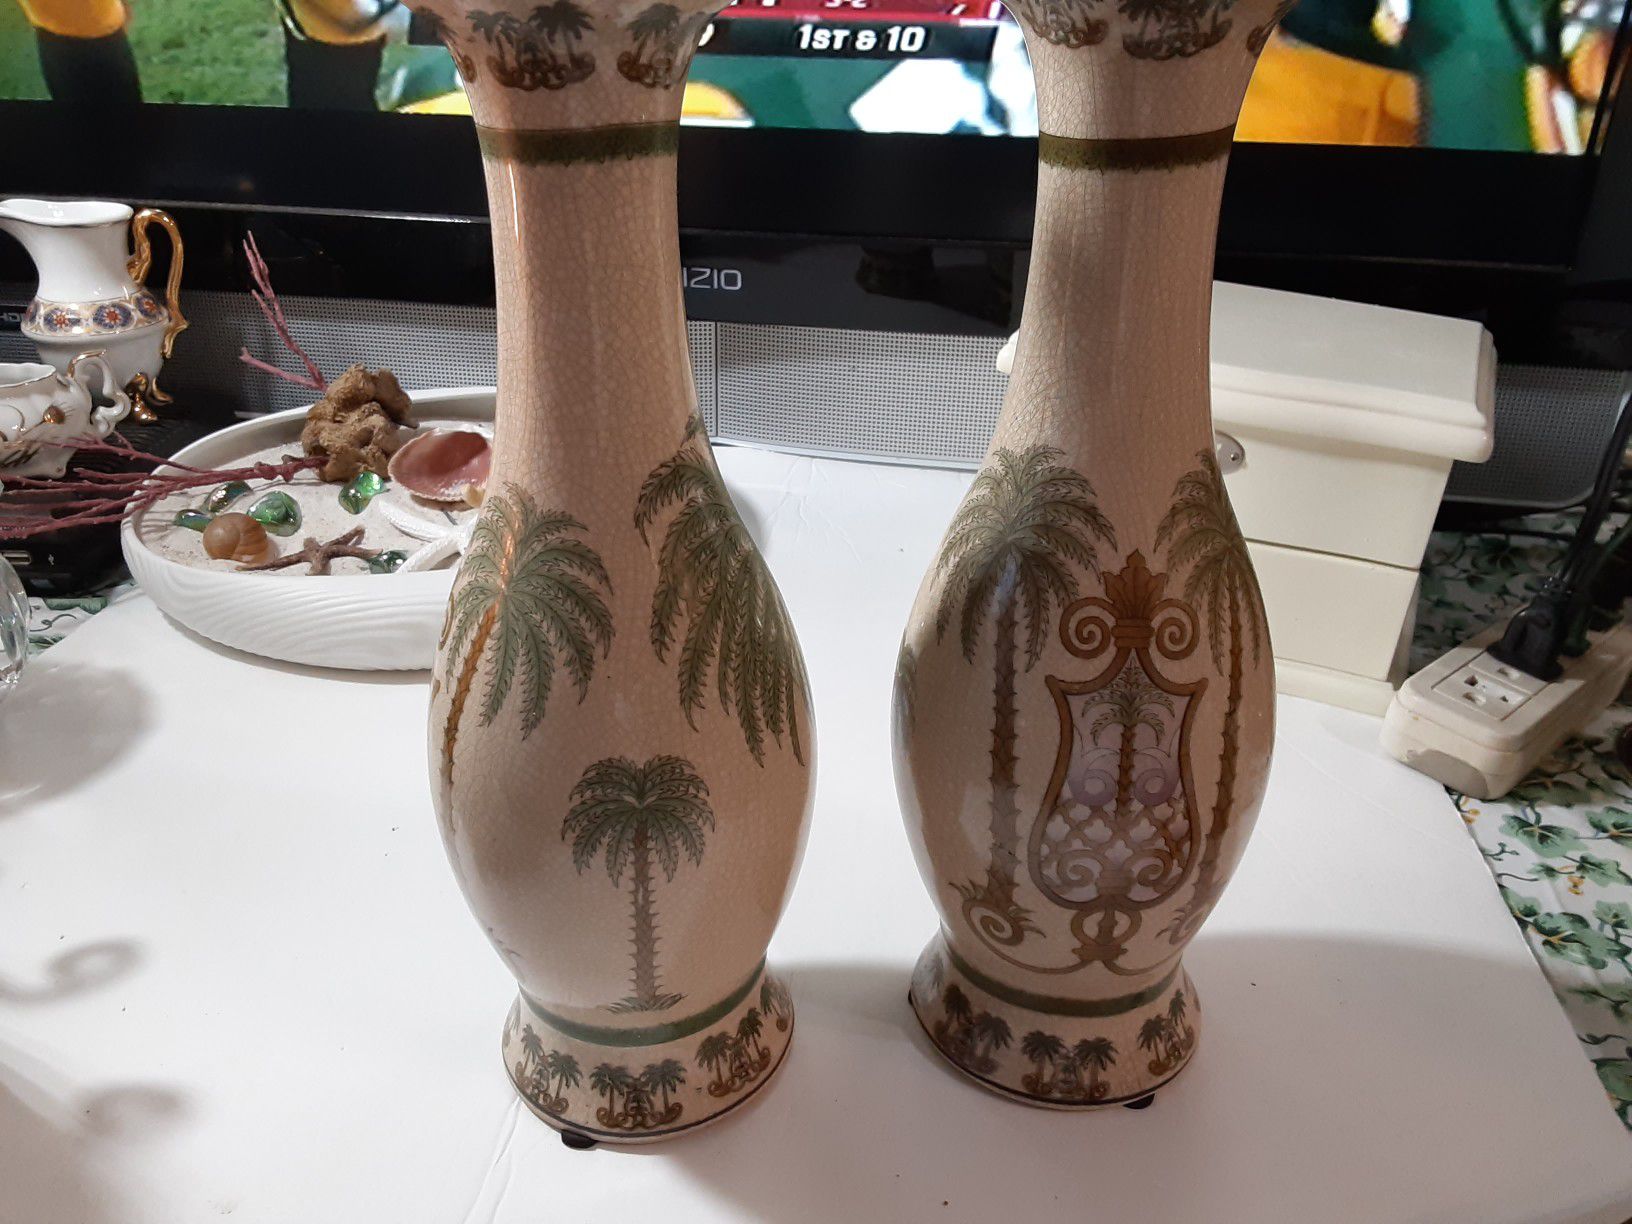 A PAIR of Nice Looking CLEAN Vases 10 INCHES Tall